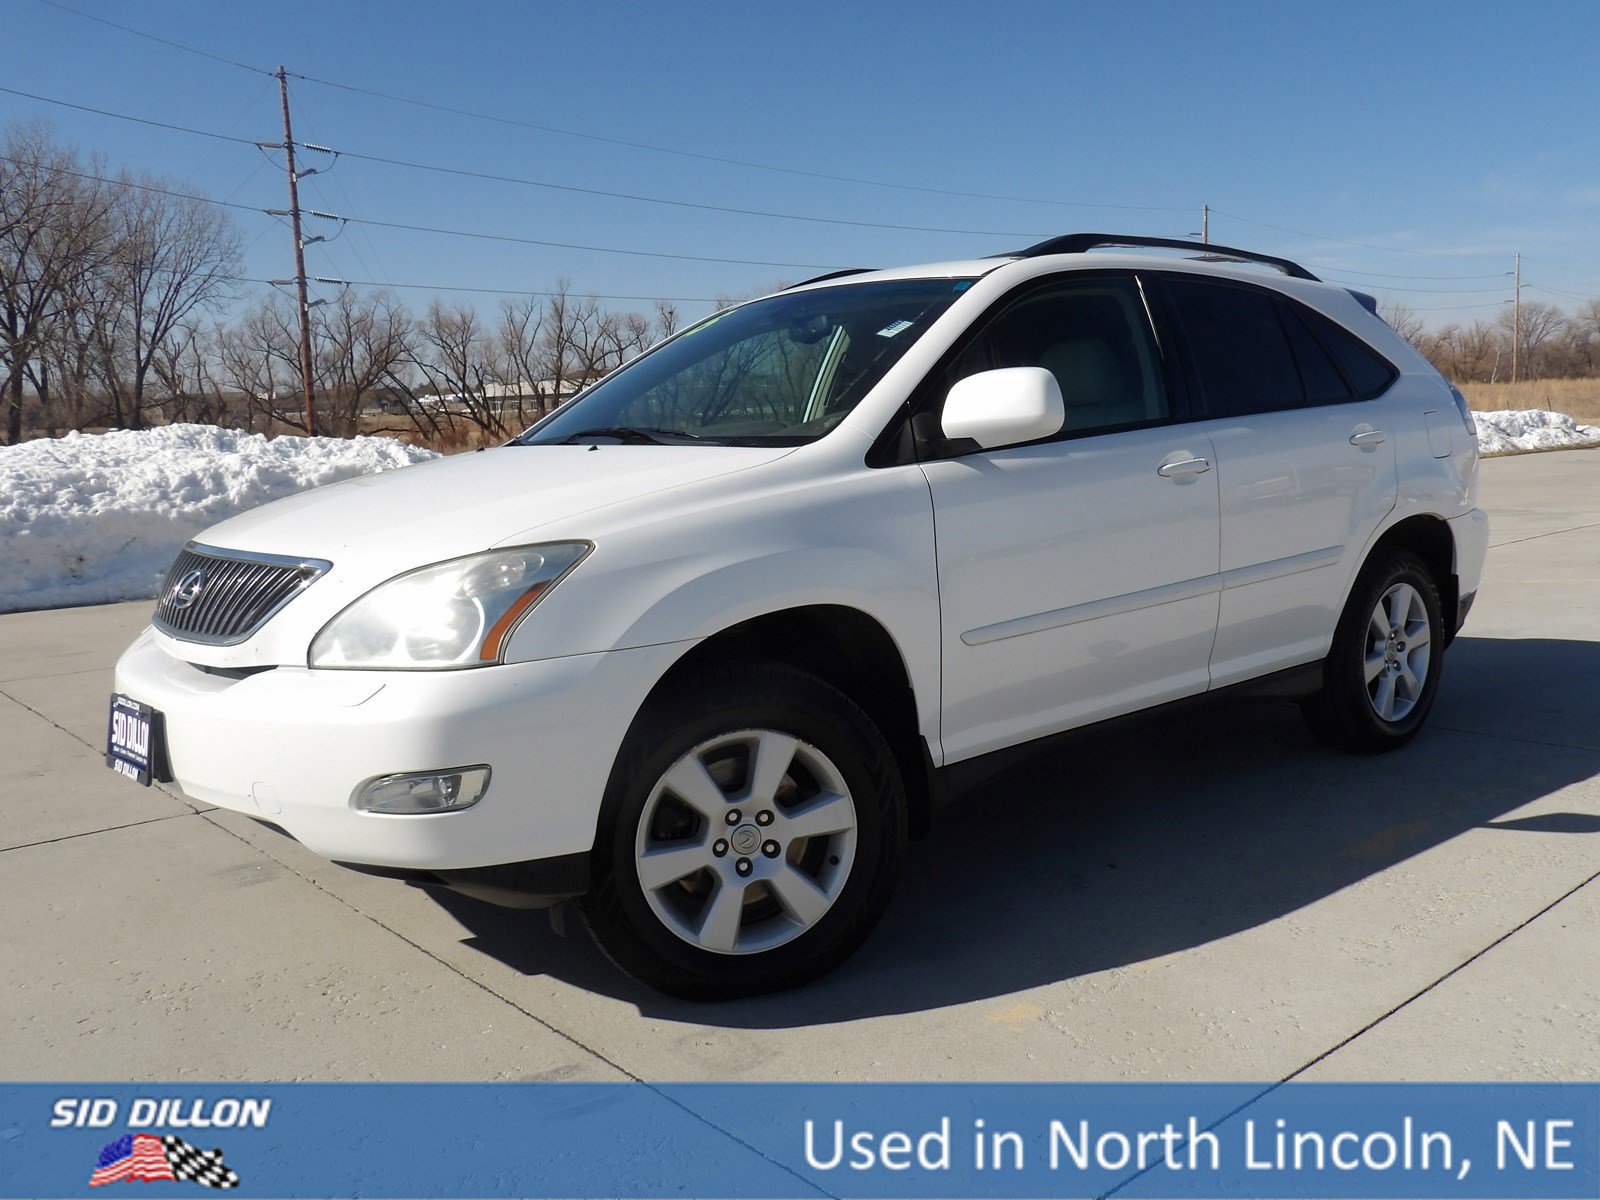 Pre-Owned 2005 Lexus RX 330 330 SUV in Lincoln #10j0214j | Sid Dillon Nissan